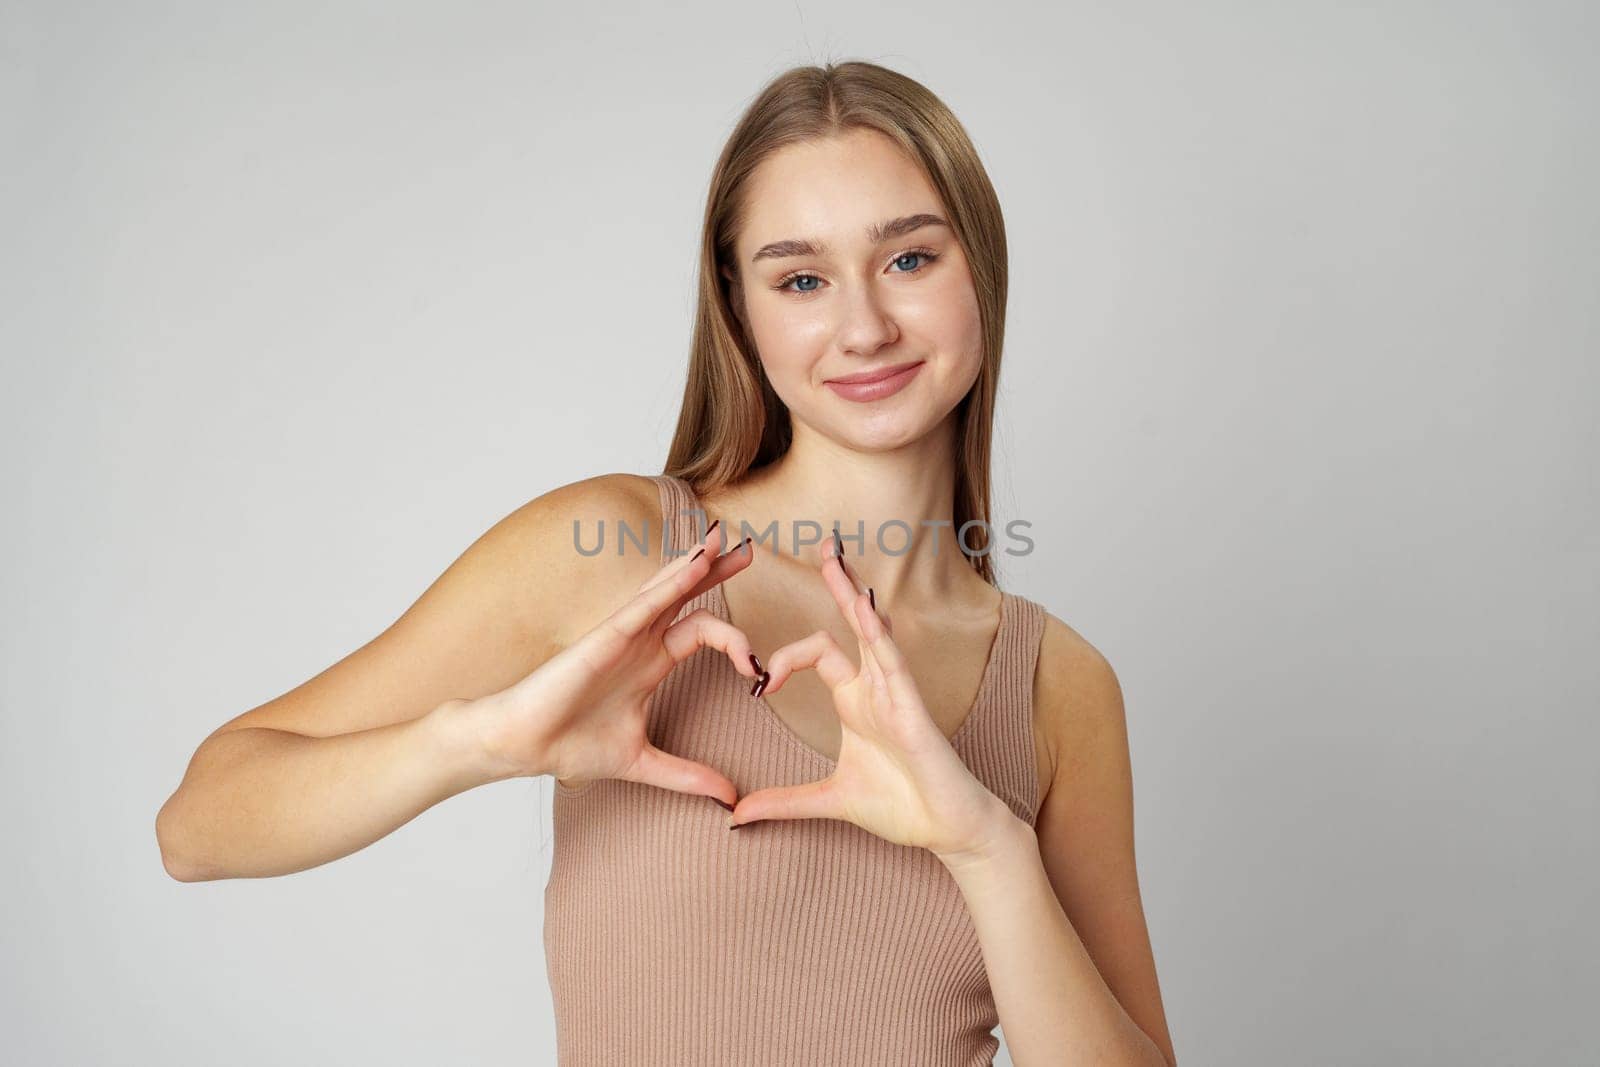 Smiling young woman showing heart with two hands on gray background by Fabrikasimf